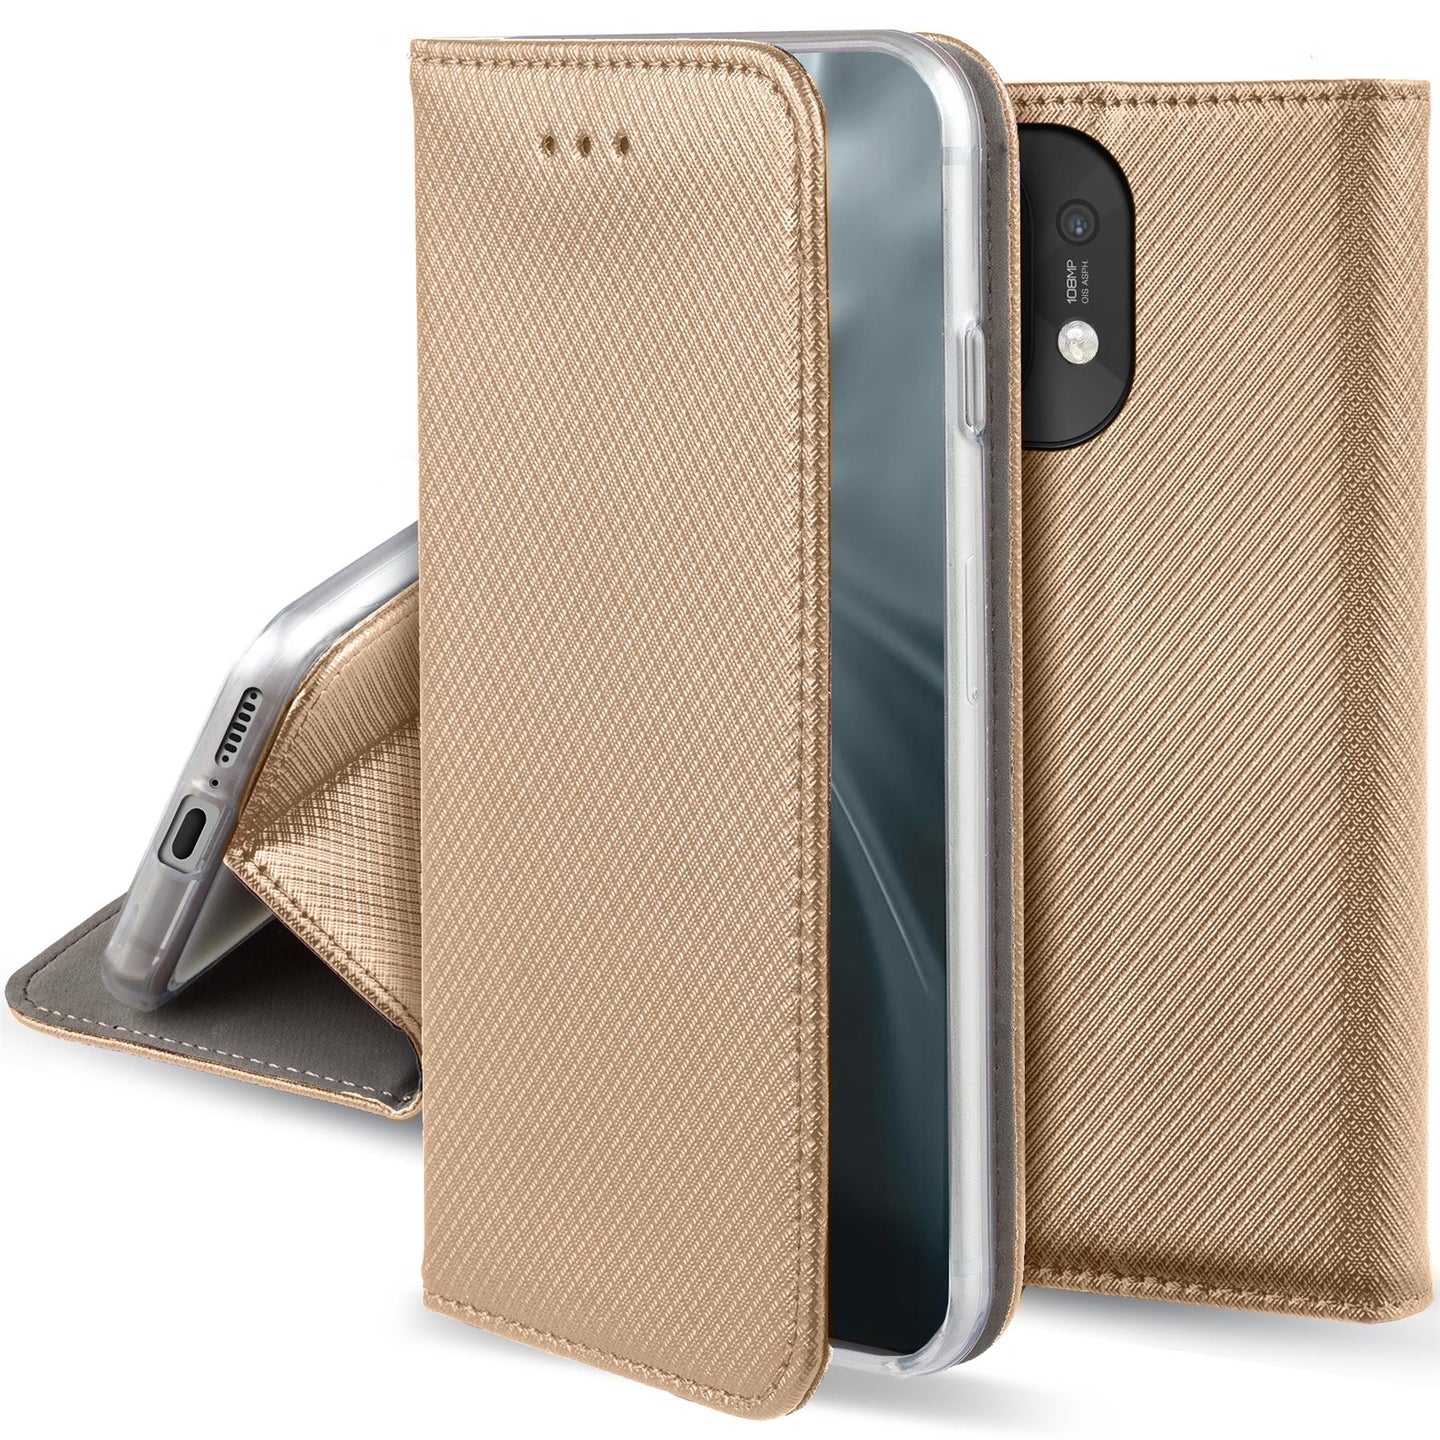 Moozy Case Flip Cover for Xiaomi Mi 11, Gold - Smart Magnetic Flip Case Flip Folio Wallet Case with Card Holder and Stand, Credit Card Slots10,99